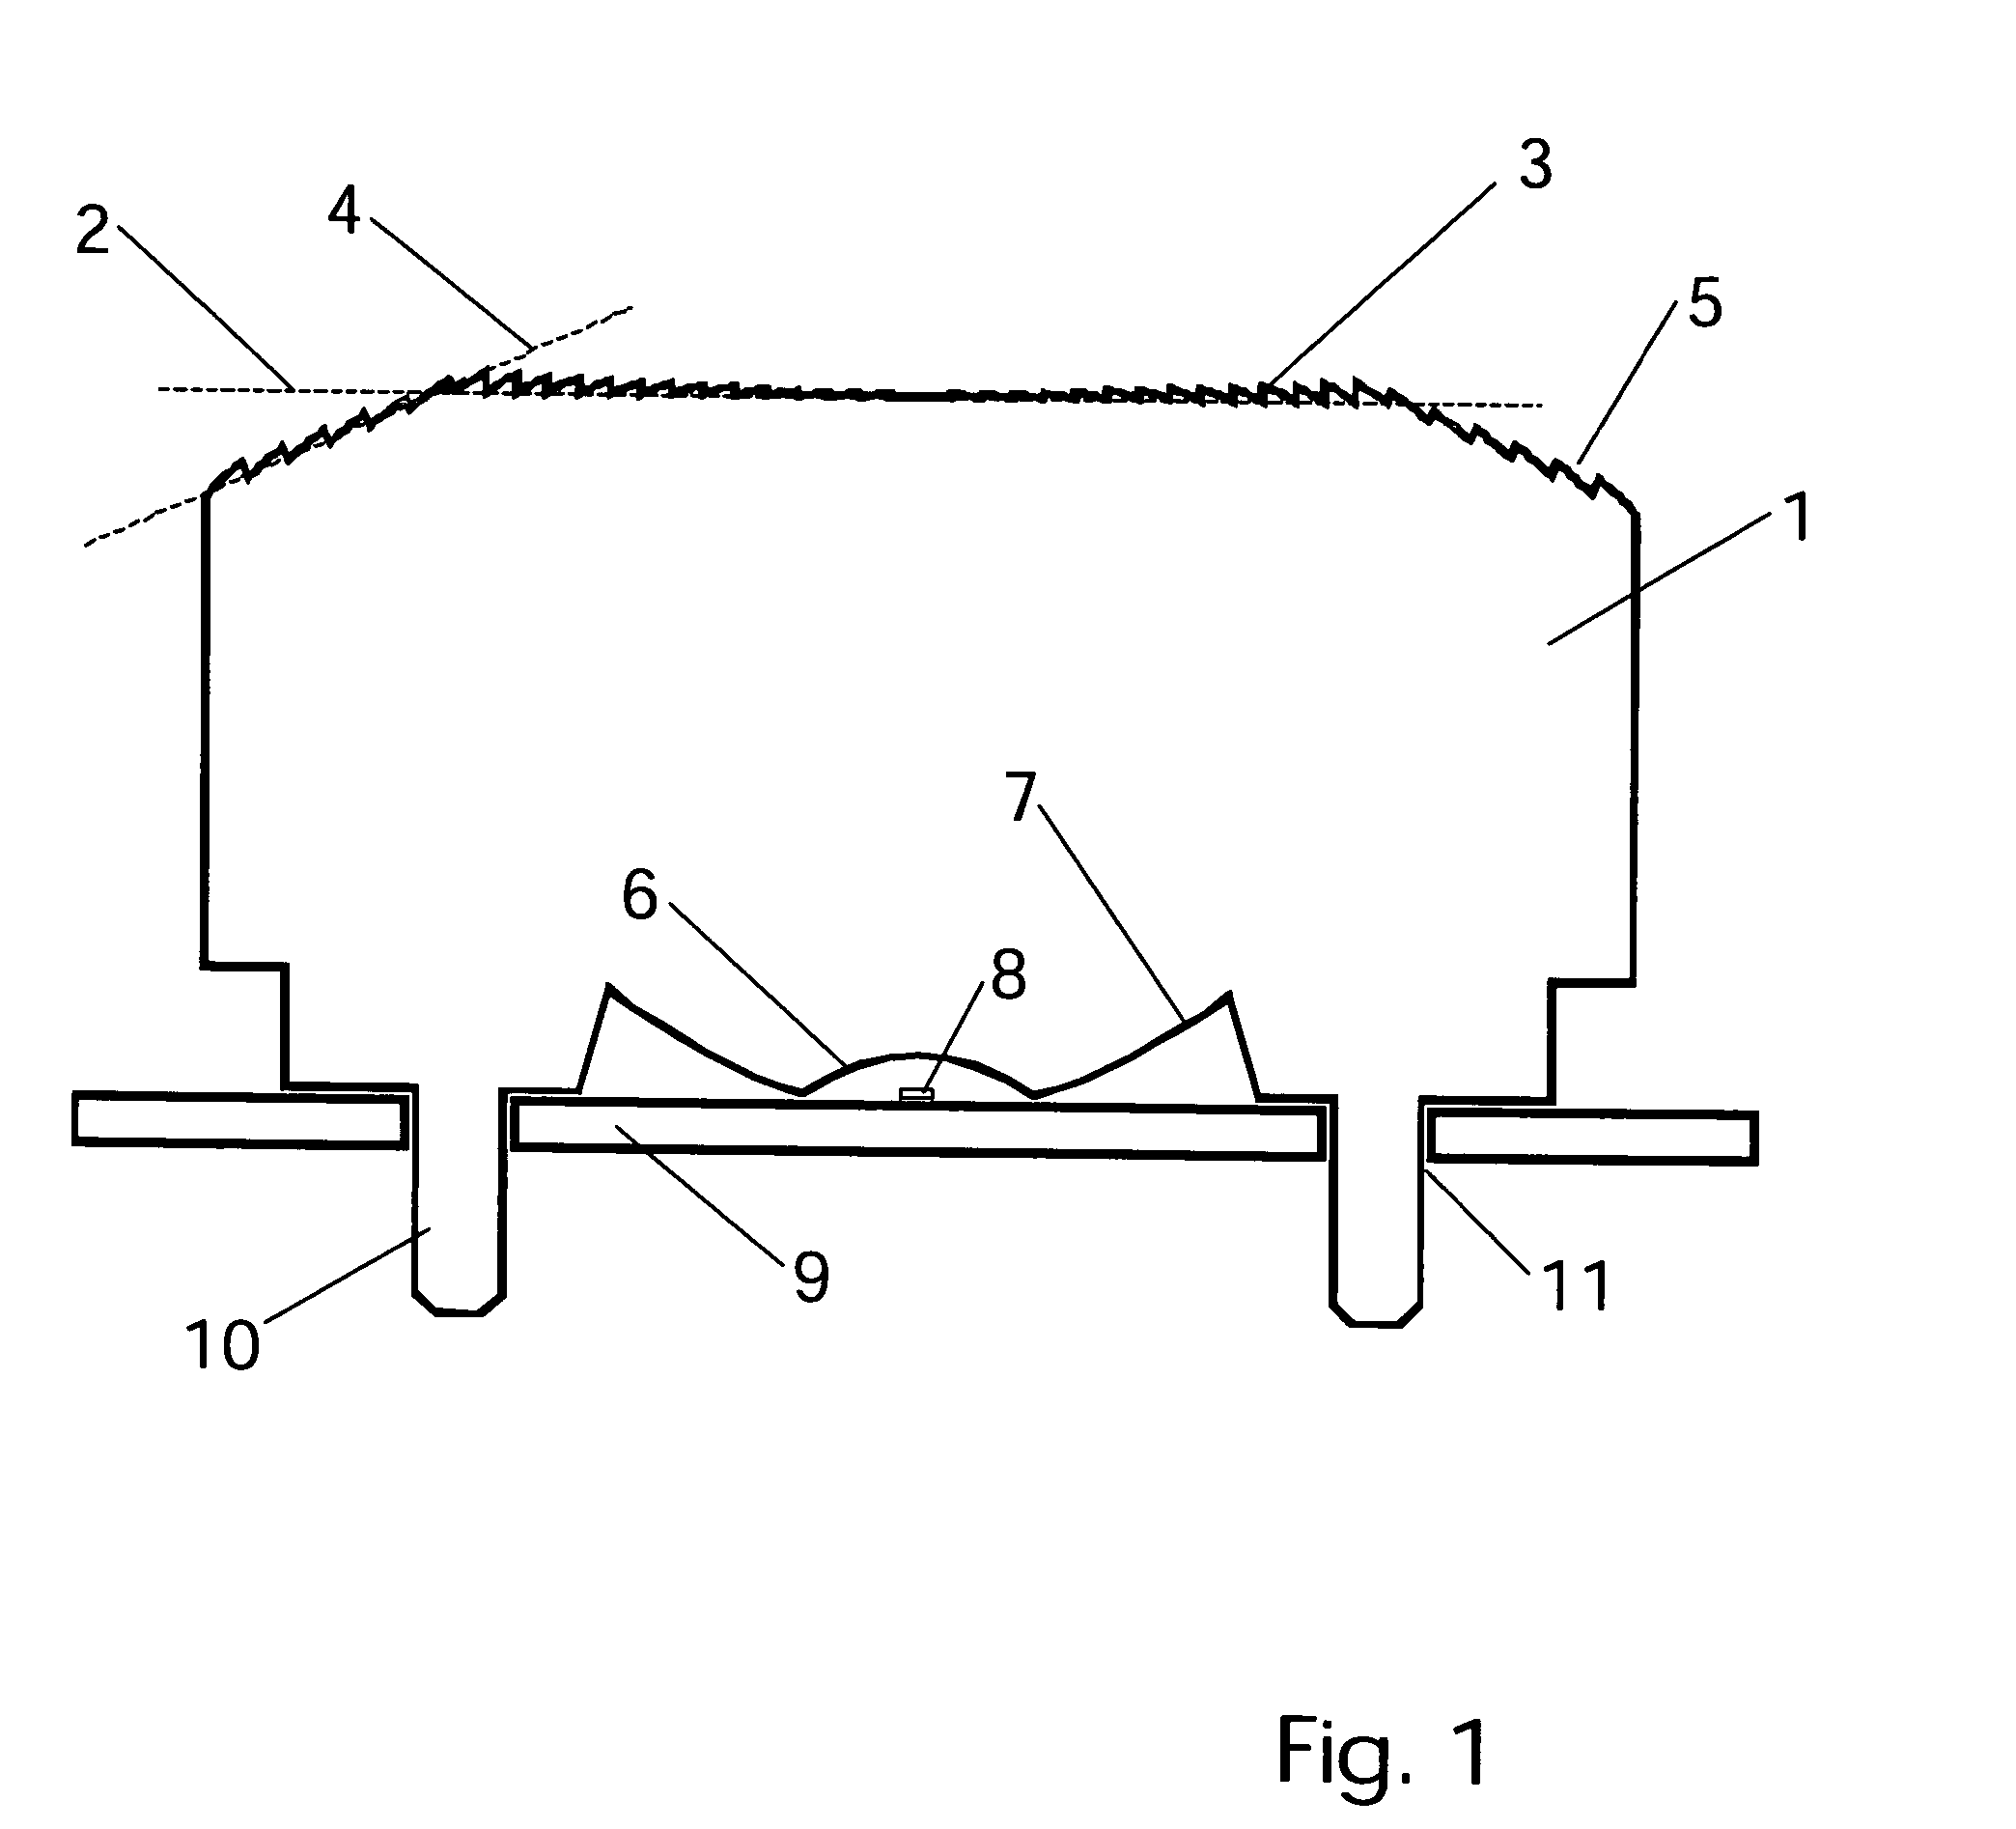 Light emitting diode system packages